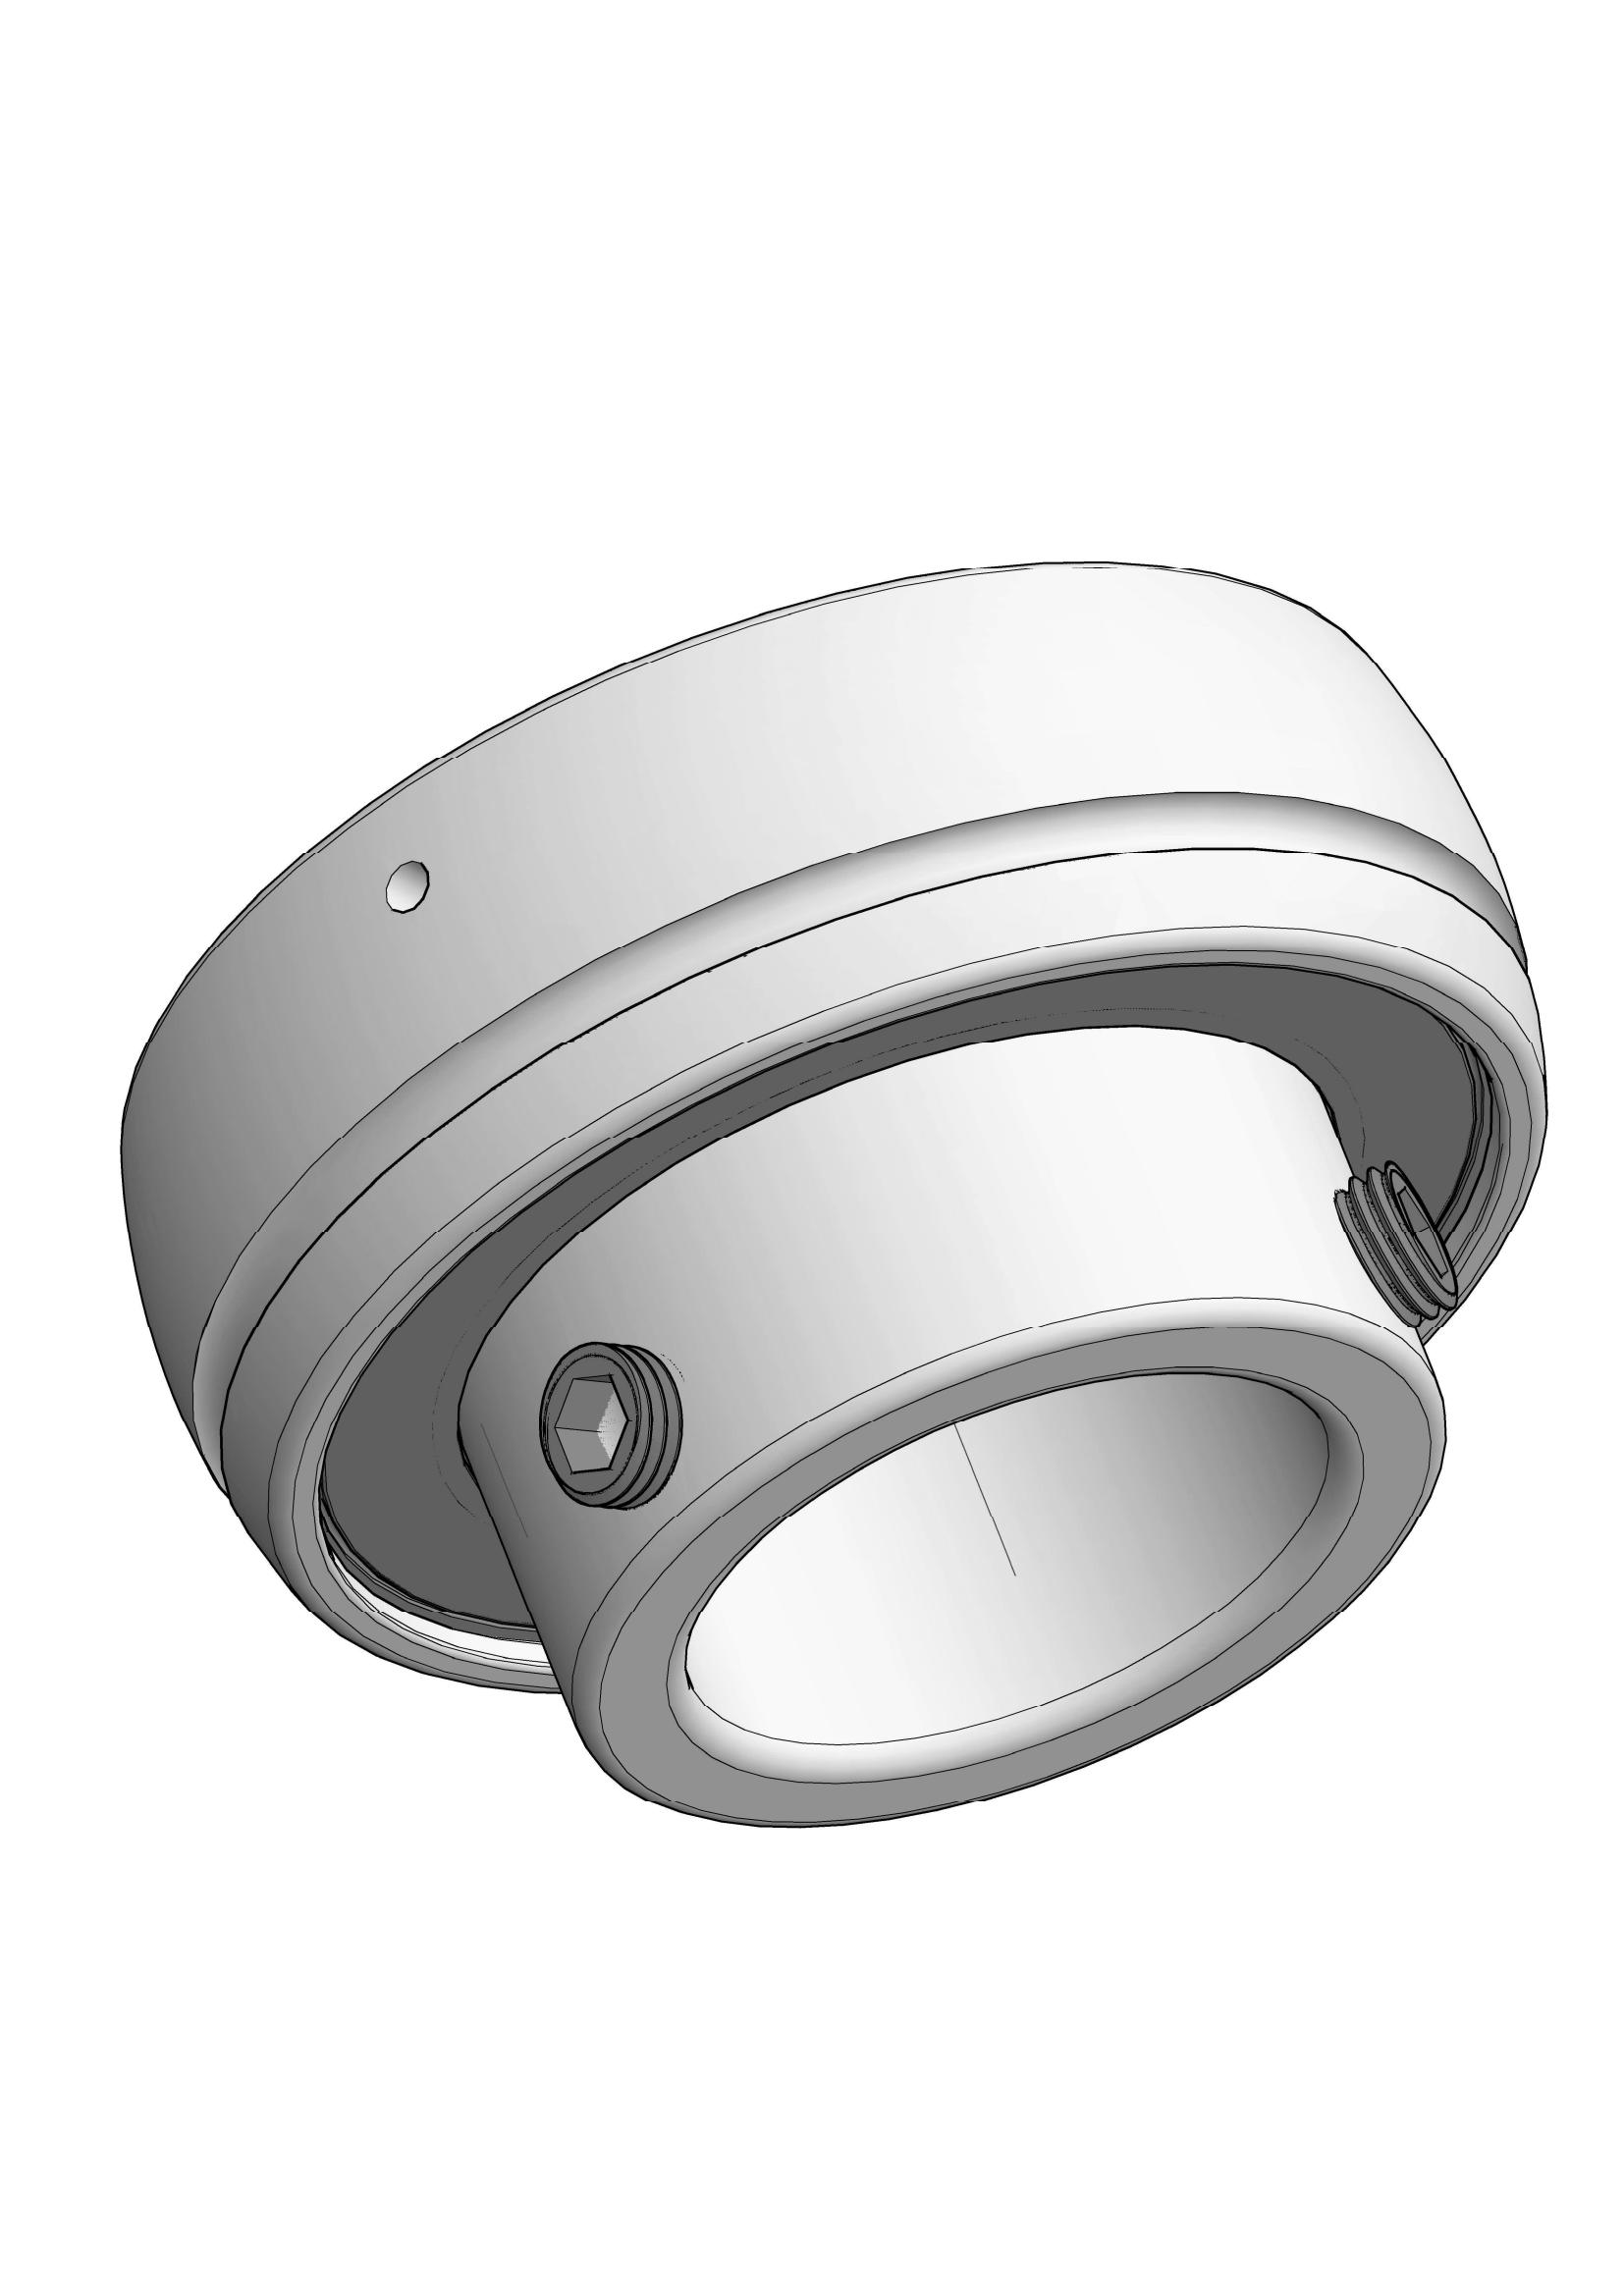 SB206-19 insert ball bearings with Eccentric Collar Lock with 1-3/16 inch Bore